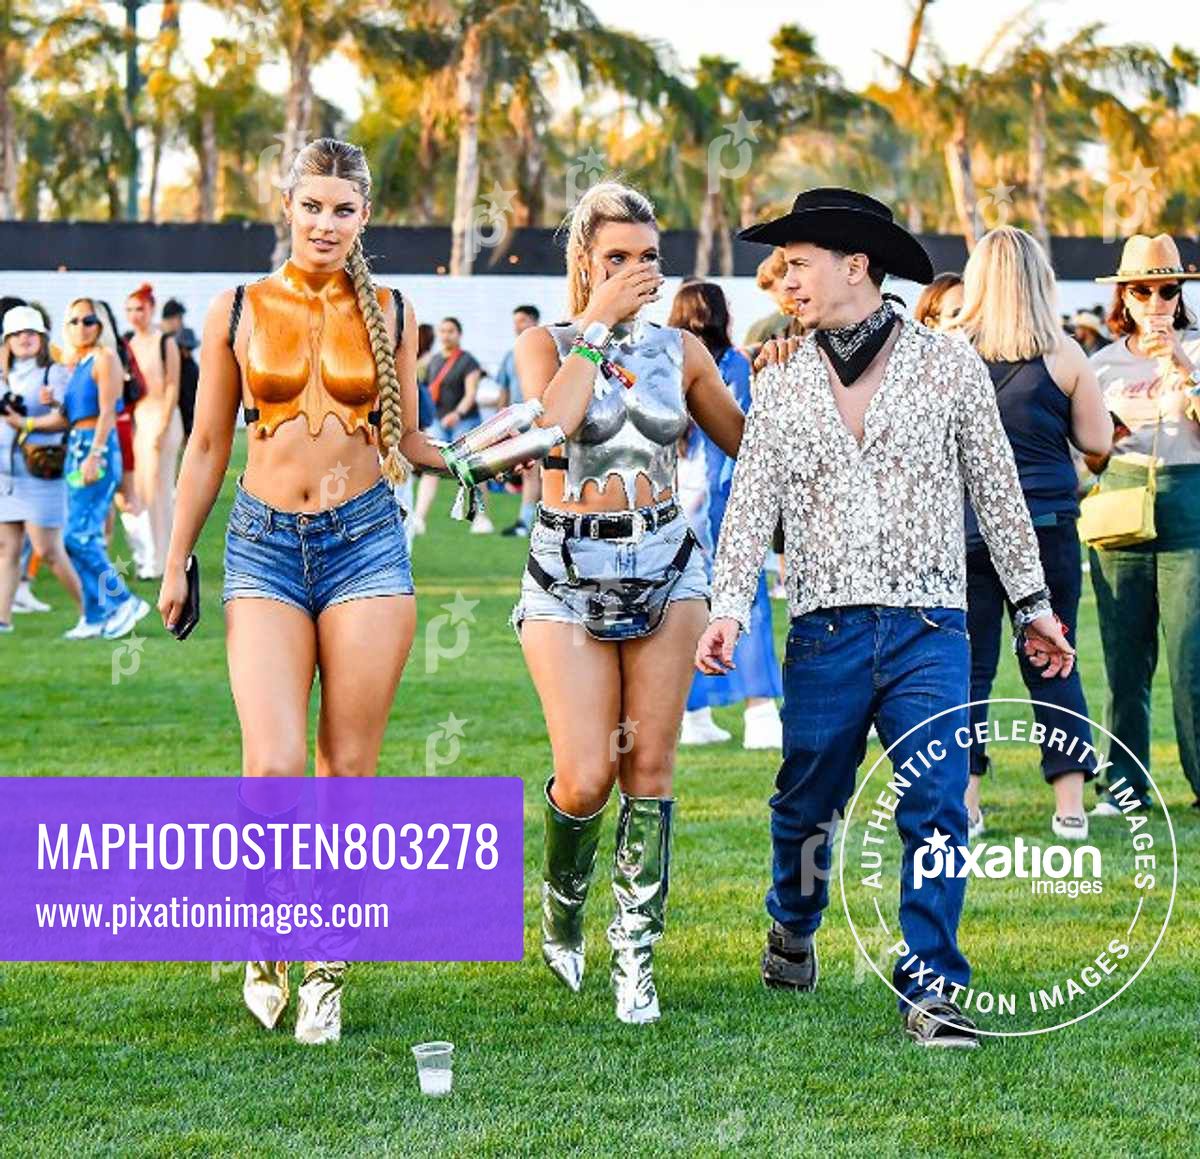 Lele Pons & Hannah Stocking Wear Matching Metallic Outfits While Attending The Coachella Music & Arts Festival in Indio, CA.